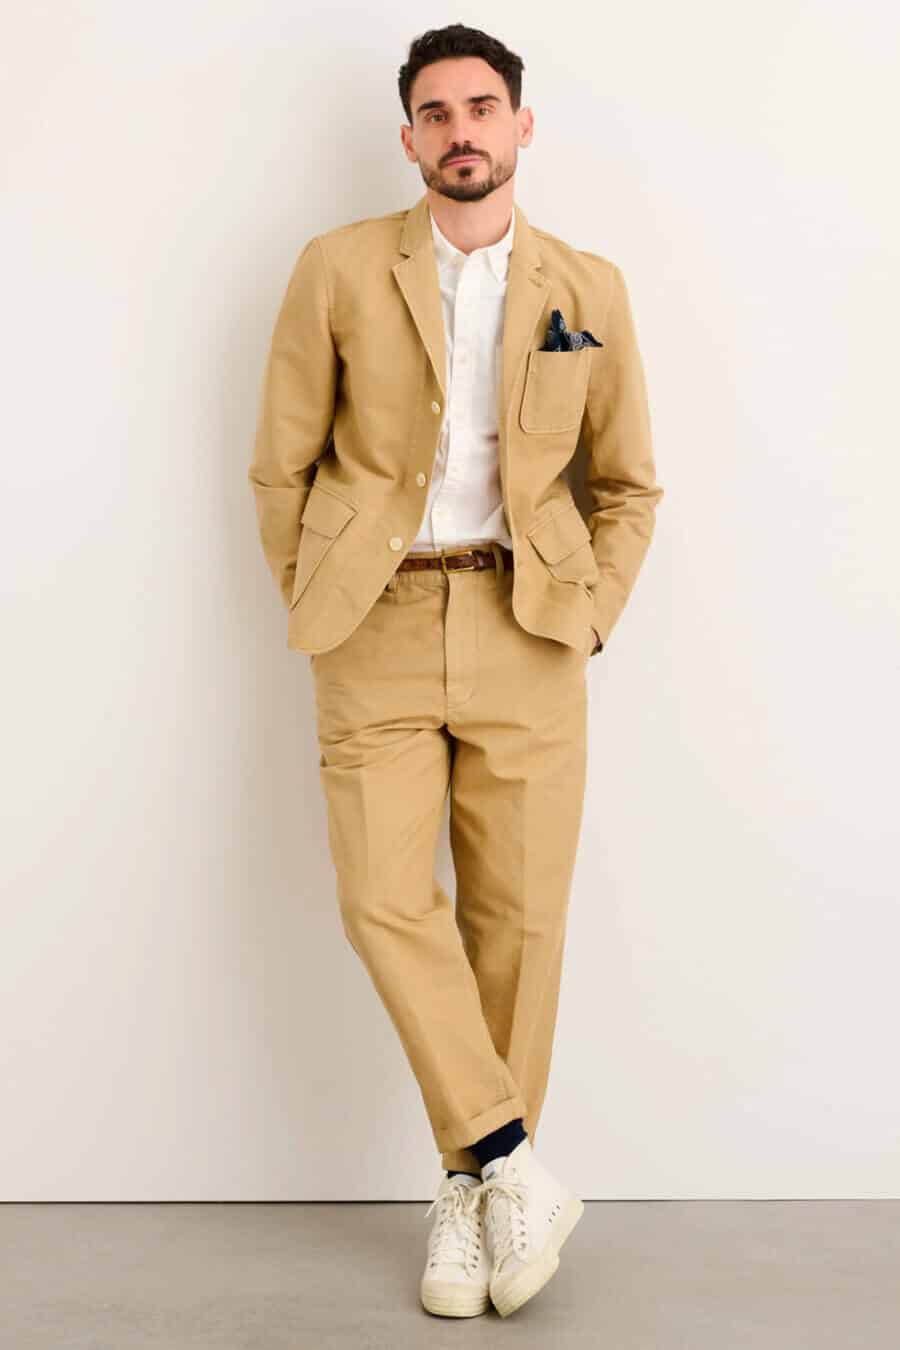 Men's beige cotton workwear suit with a white shirt and canvas sneakers outfit